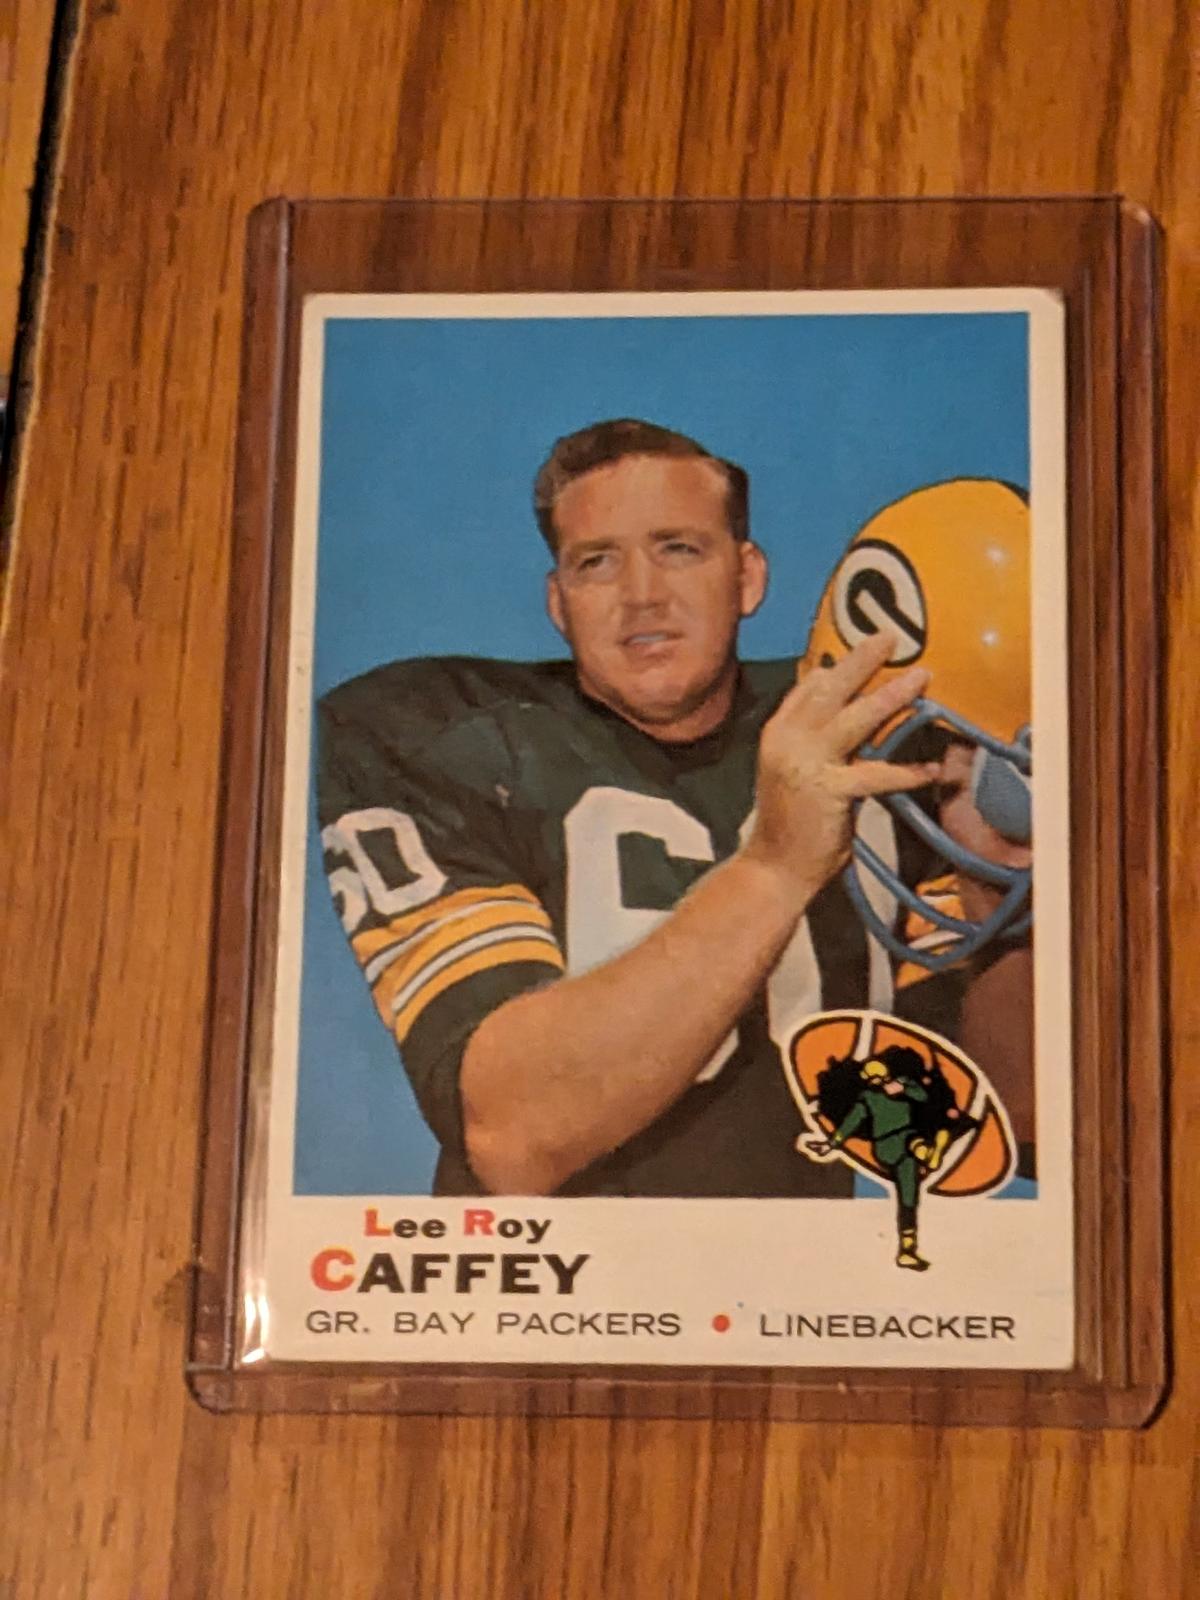 LEE ROY CAFFEY 1969 Vintage Topps Card #146 GREEN BAY PACKERS